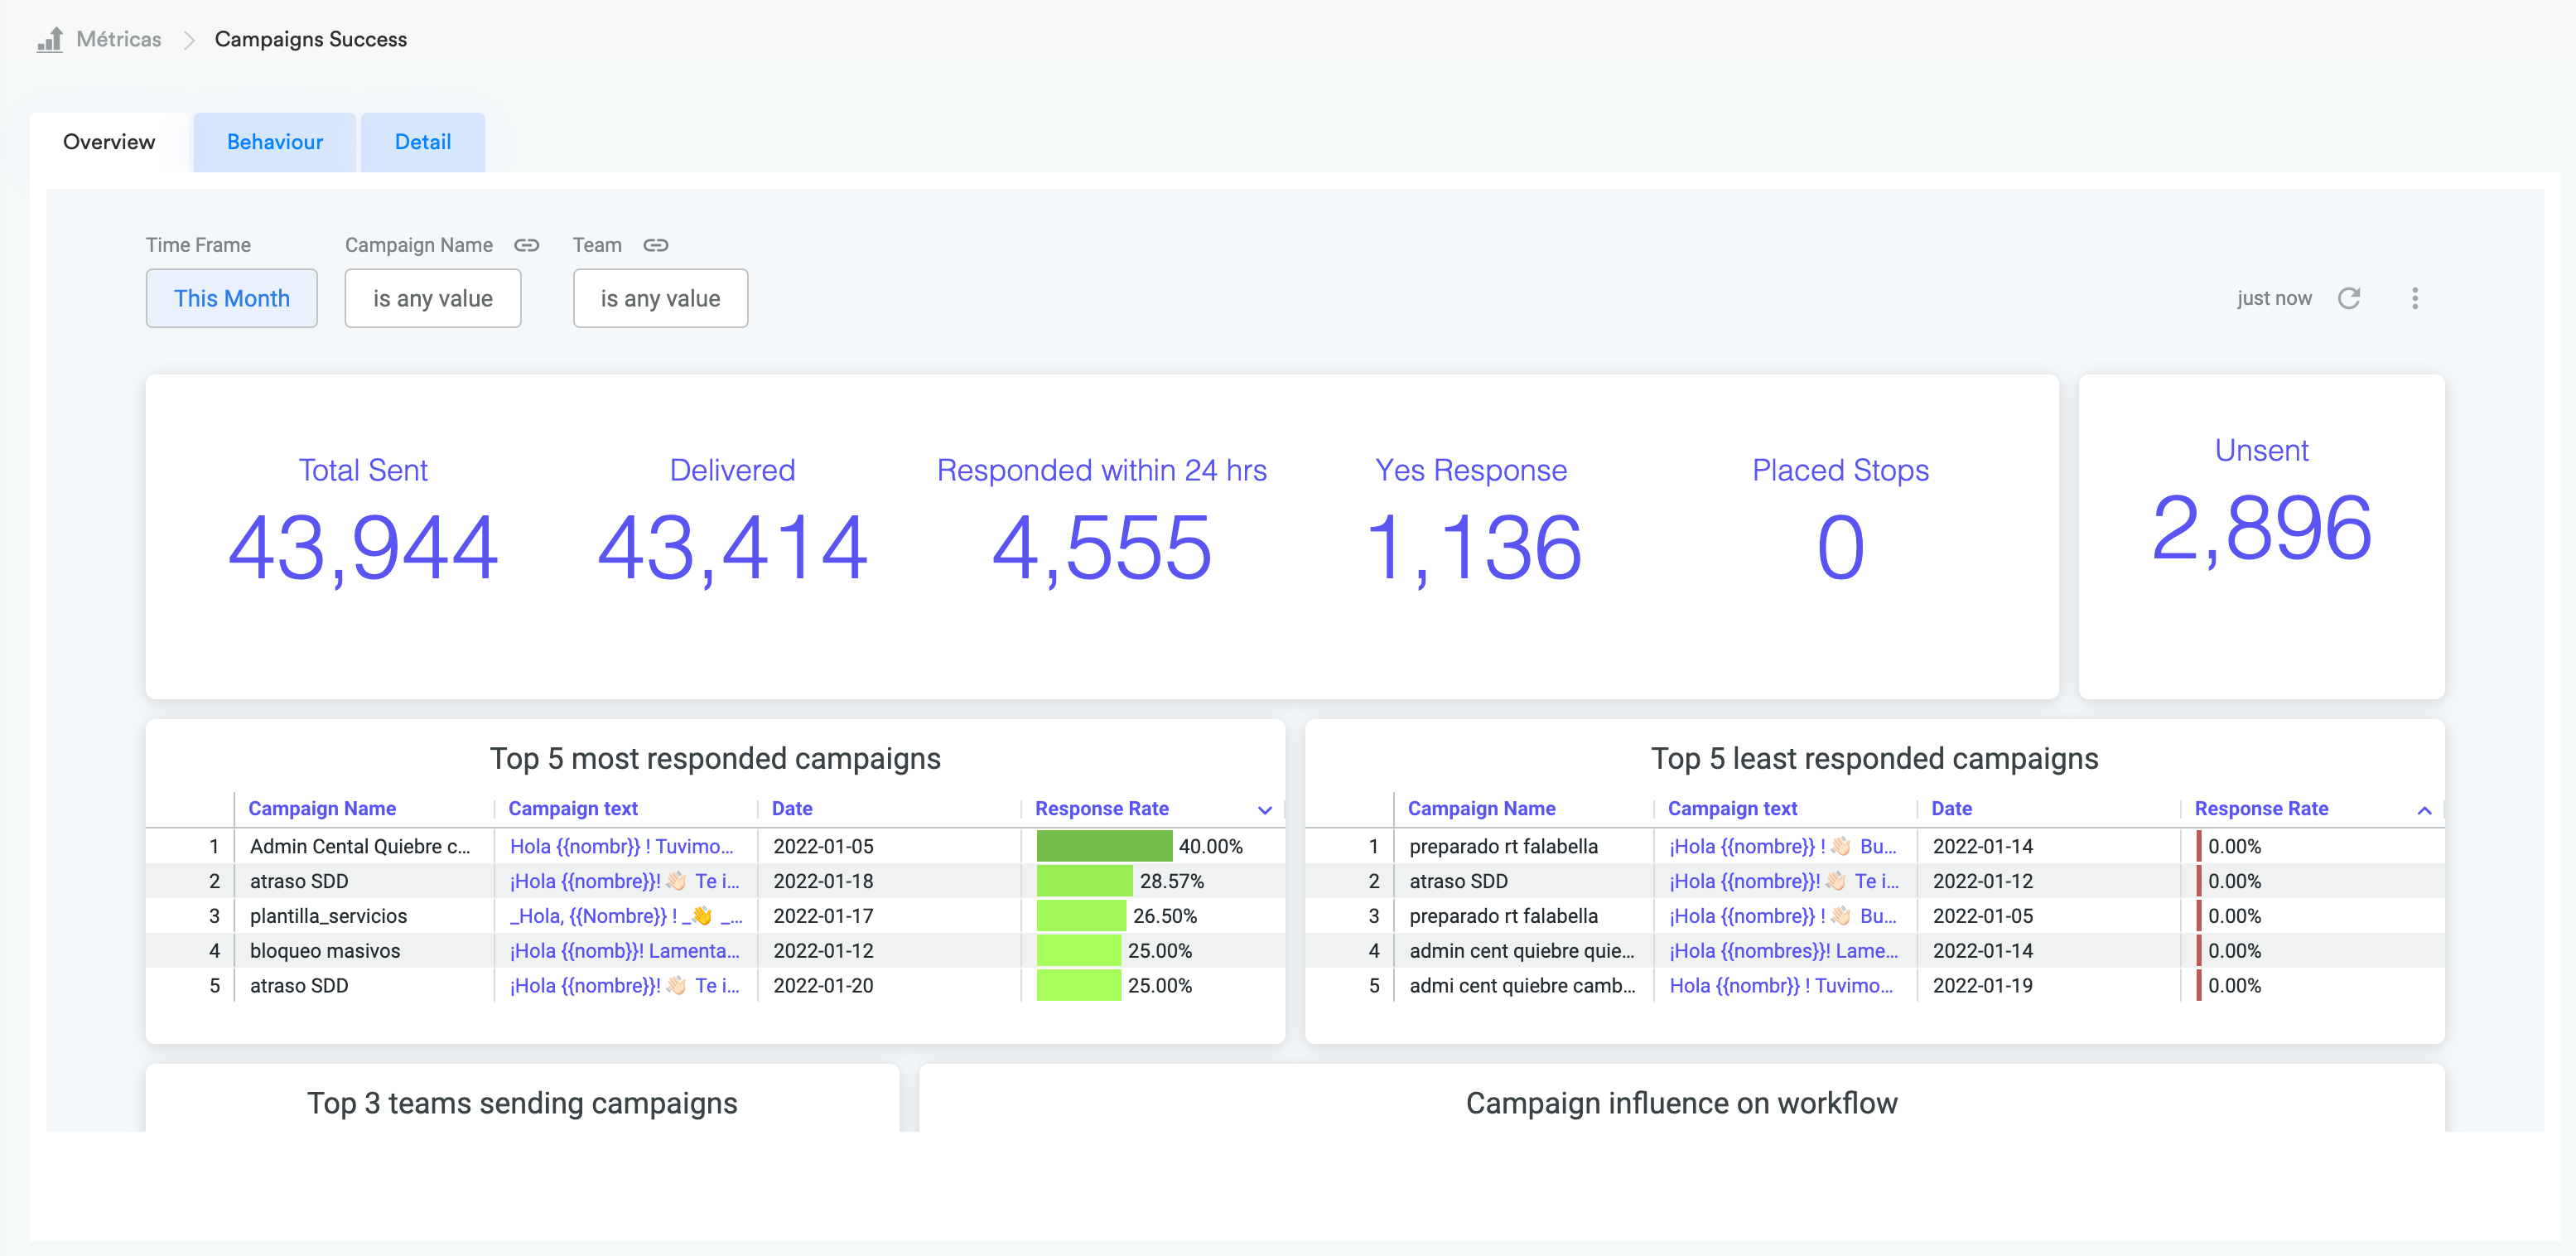 Campaign Sucess Dashboard - Overview Tab
Click to enlarge